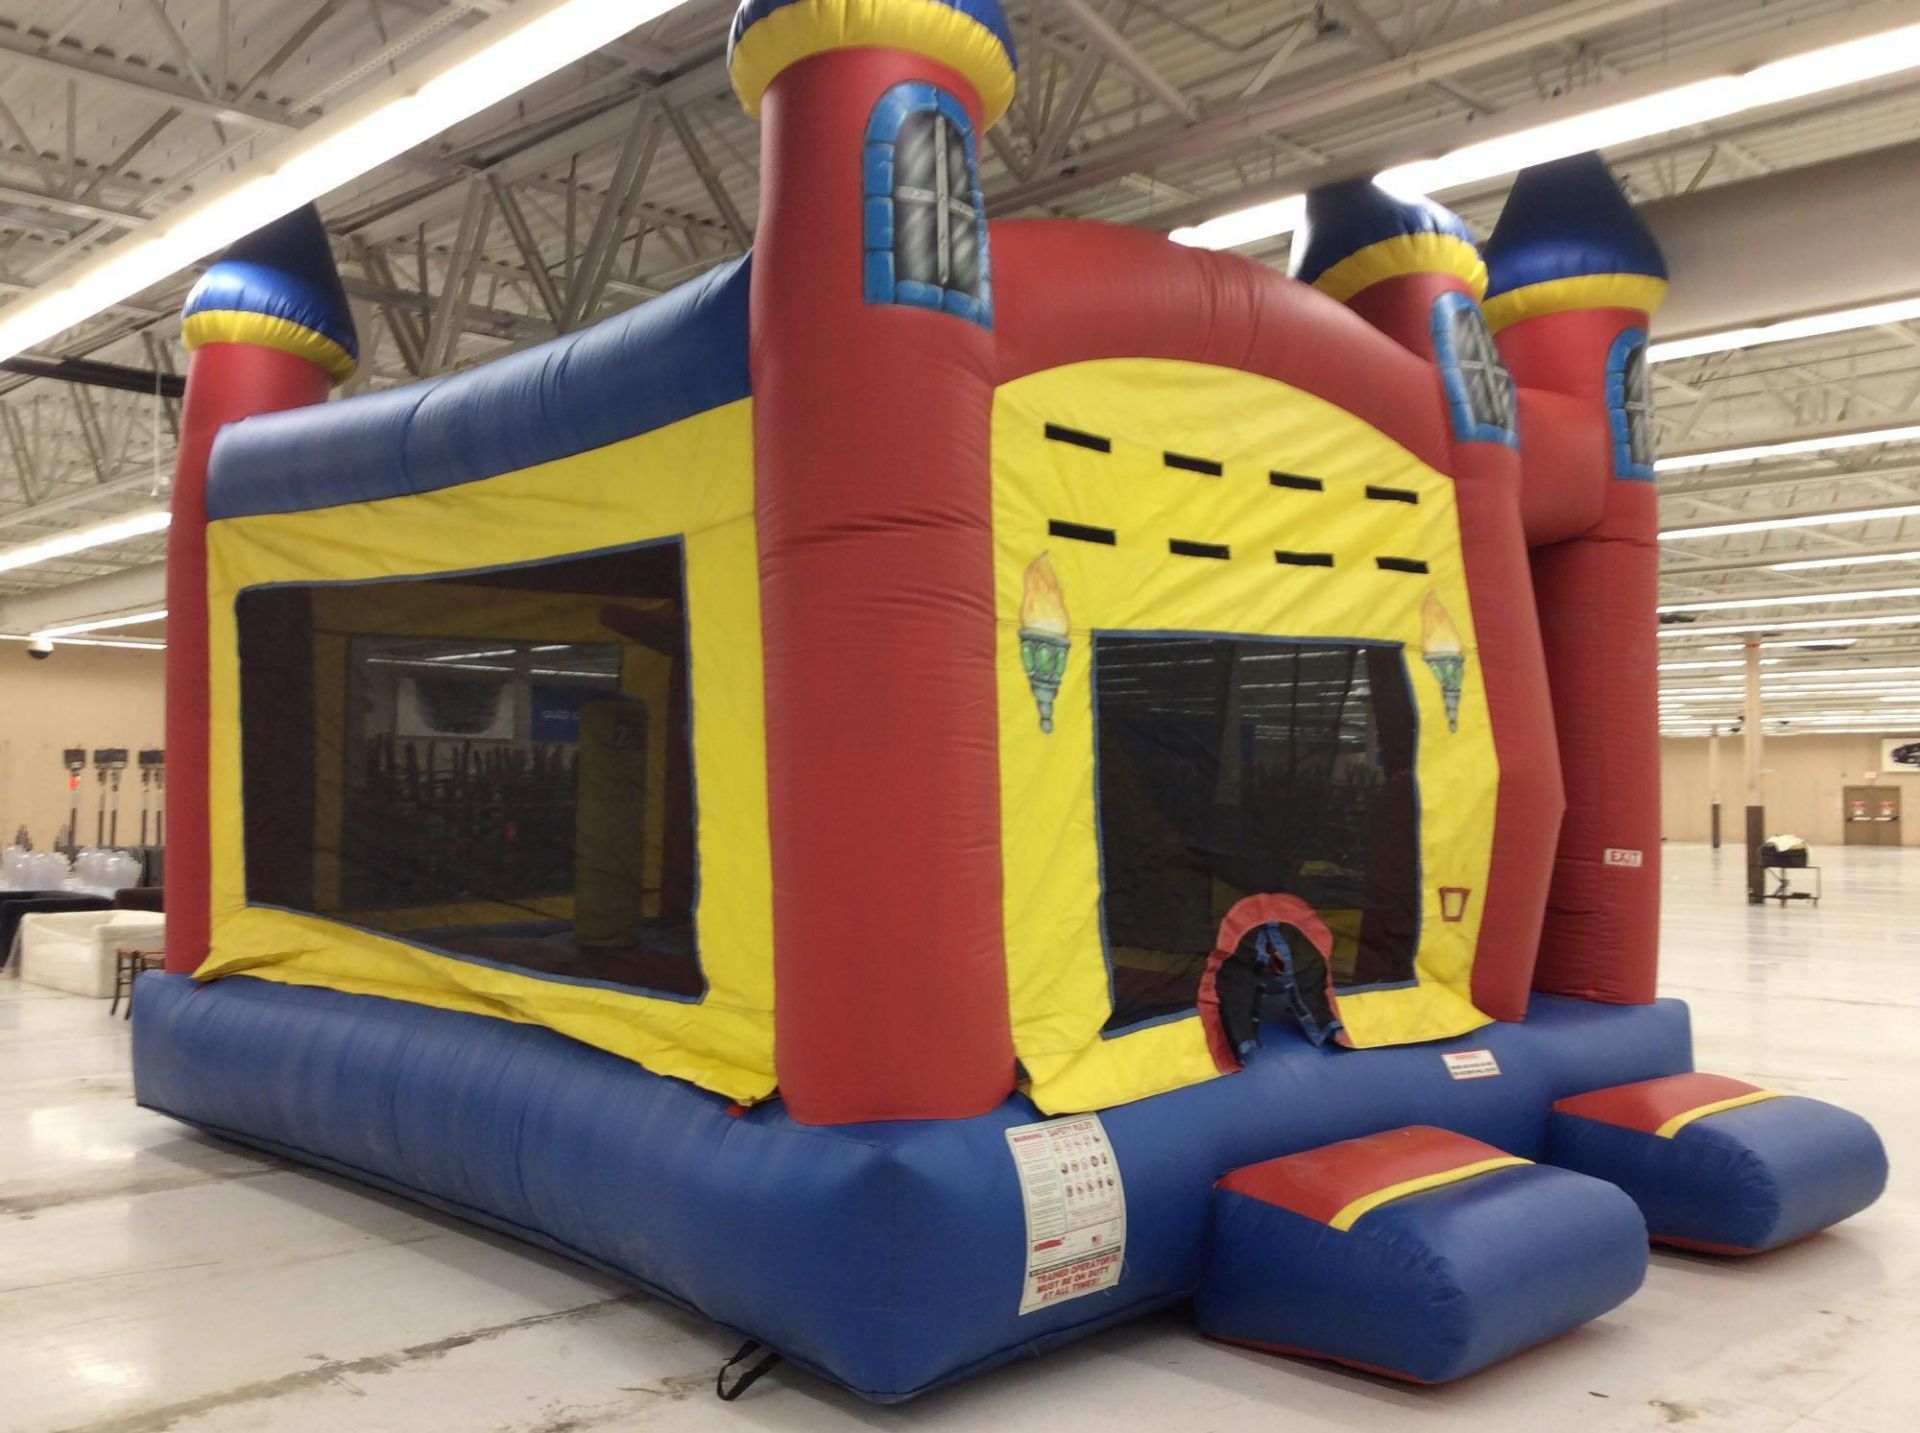 Inflatables.com brand 5-in-1 inflatable bounce with blower, approx. 15' x 20' overall